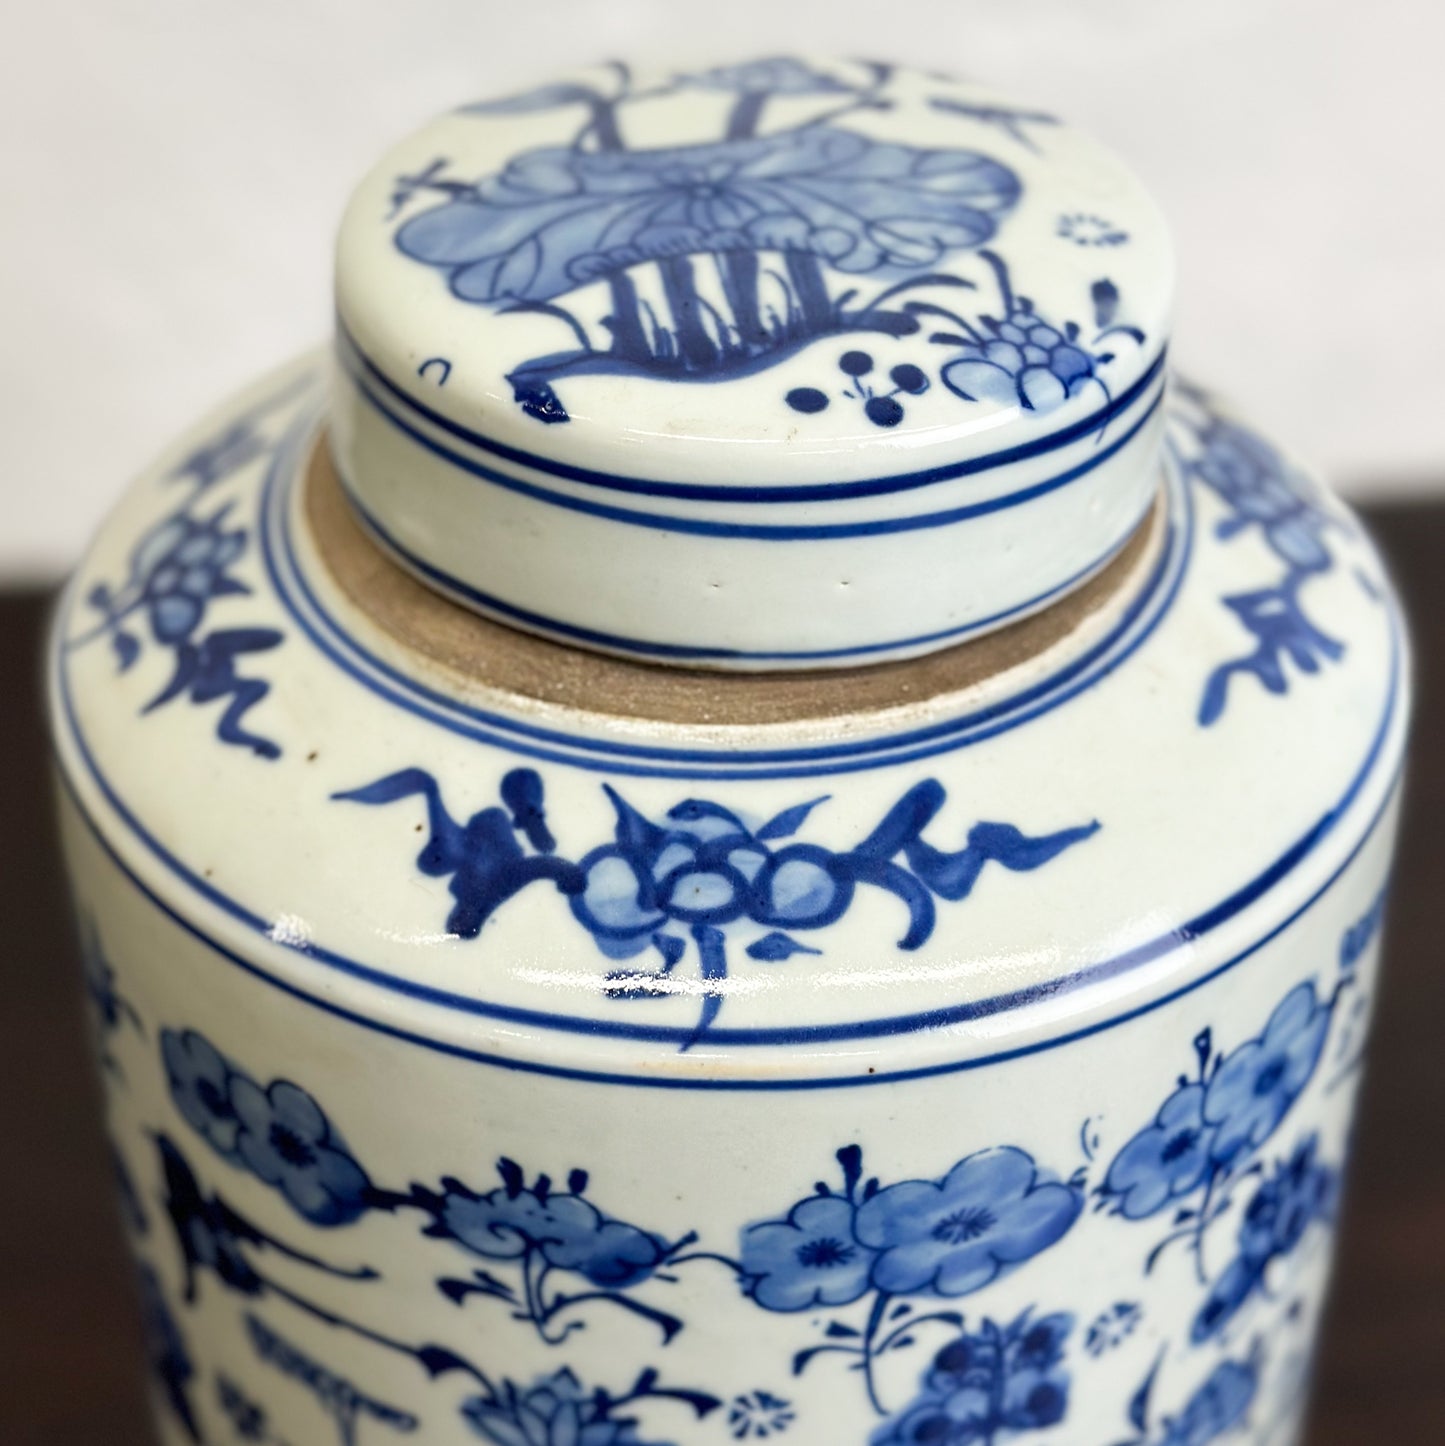 Botanical Cylindrical Porcelain Container